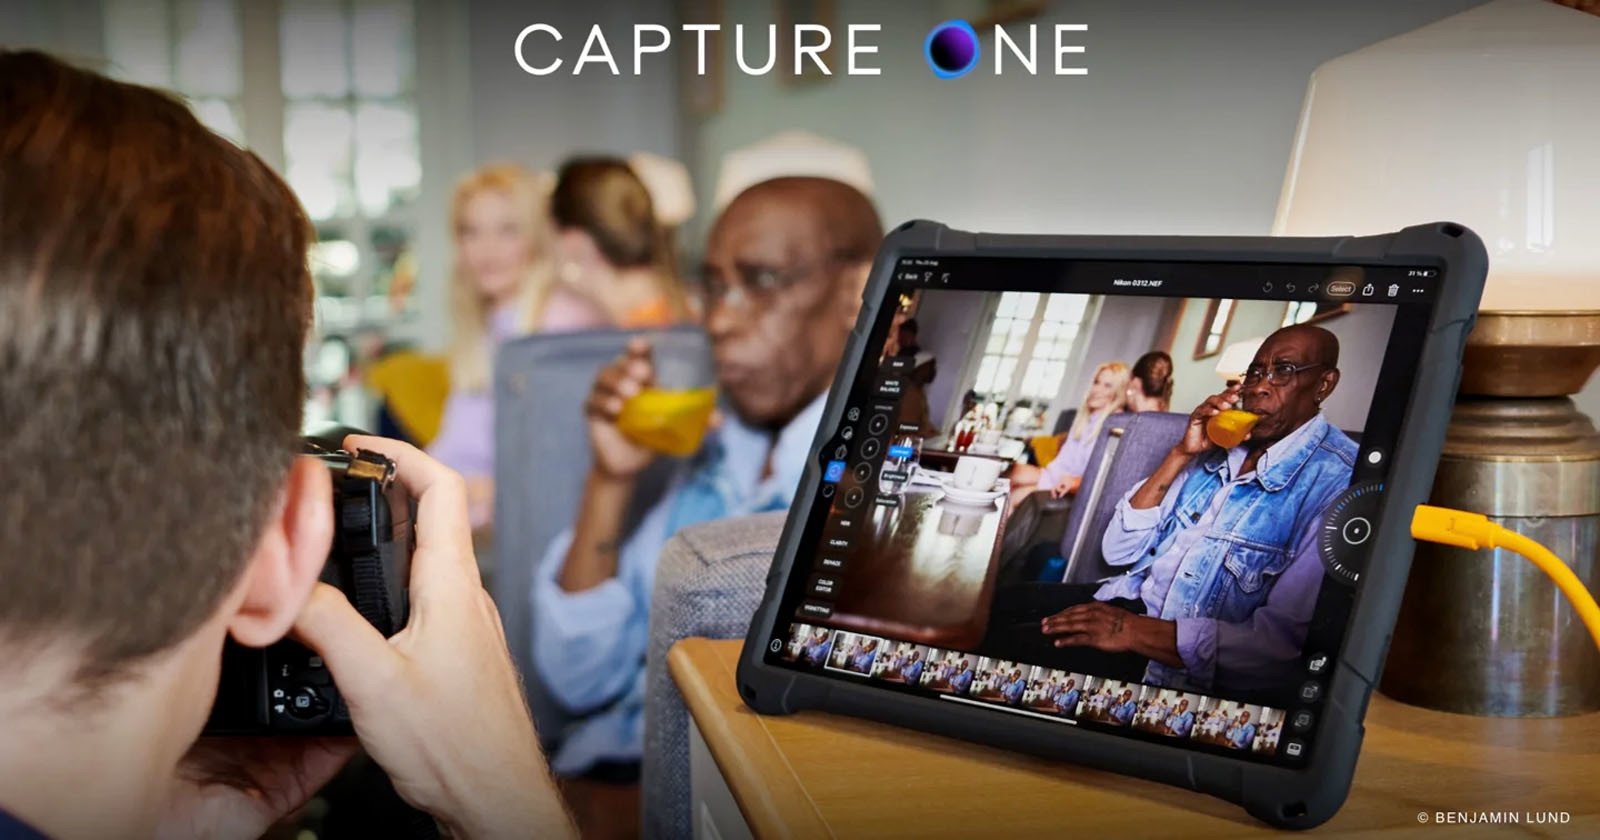  capture one adds wired wireless tethering capability its 